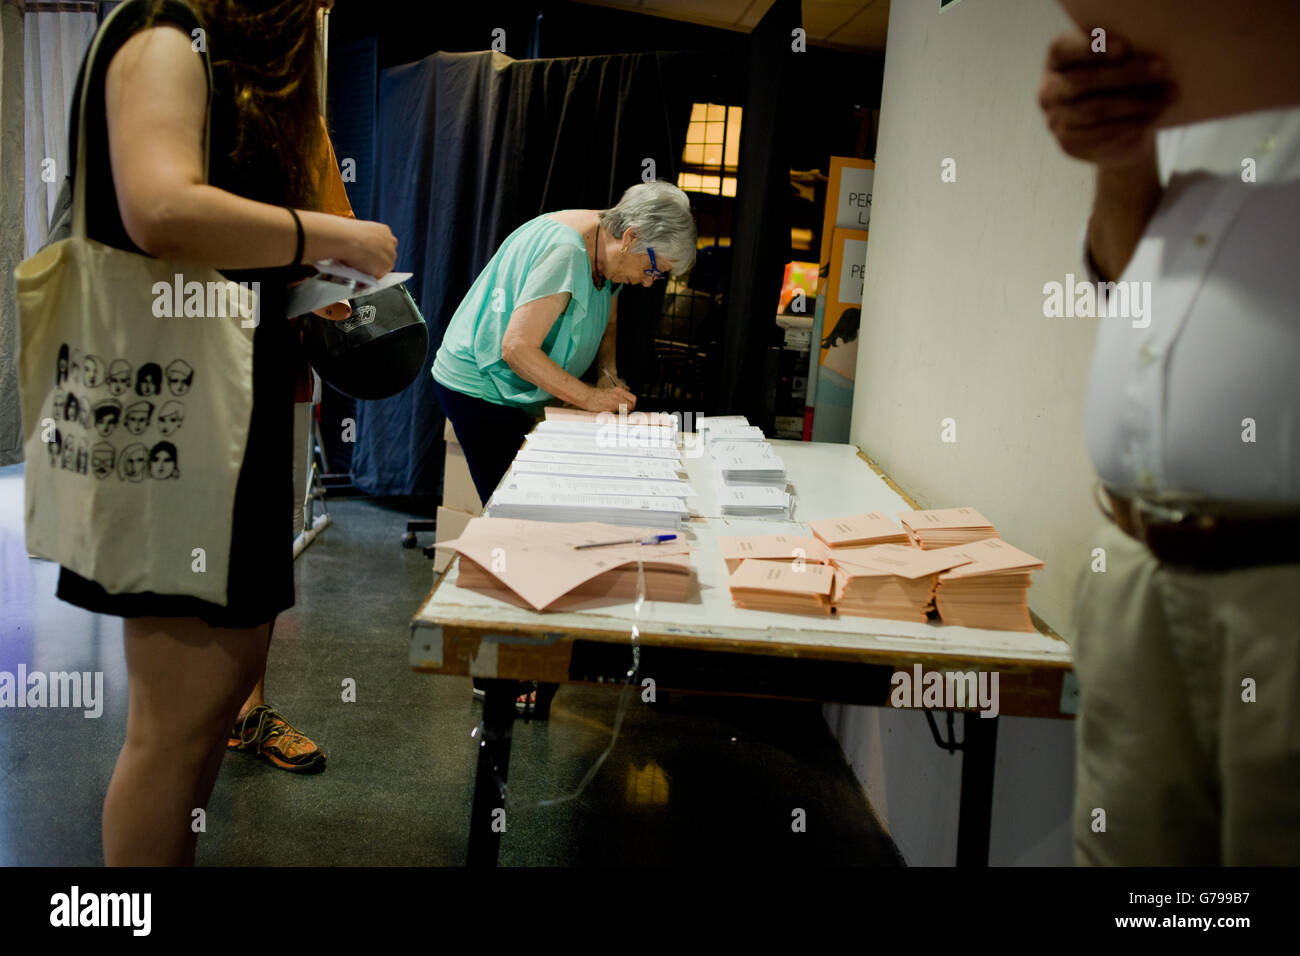 June 26, 2016 - Barcelona, Catalonia, Spain - A woman looks at ballots in a polling station in Barcelona, Spain. Spaniards are voting its second general election after six months of caretaker government. (Credit Image: © Jordi Boixareu via ZUMA Wire) Stock Photo